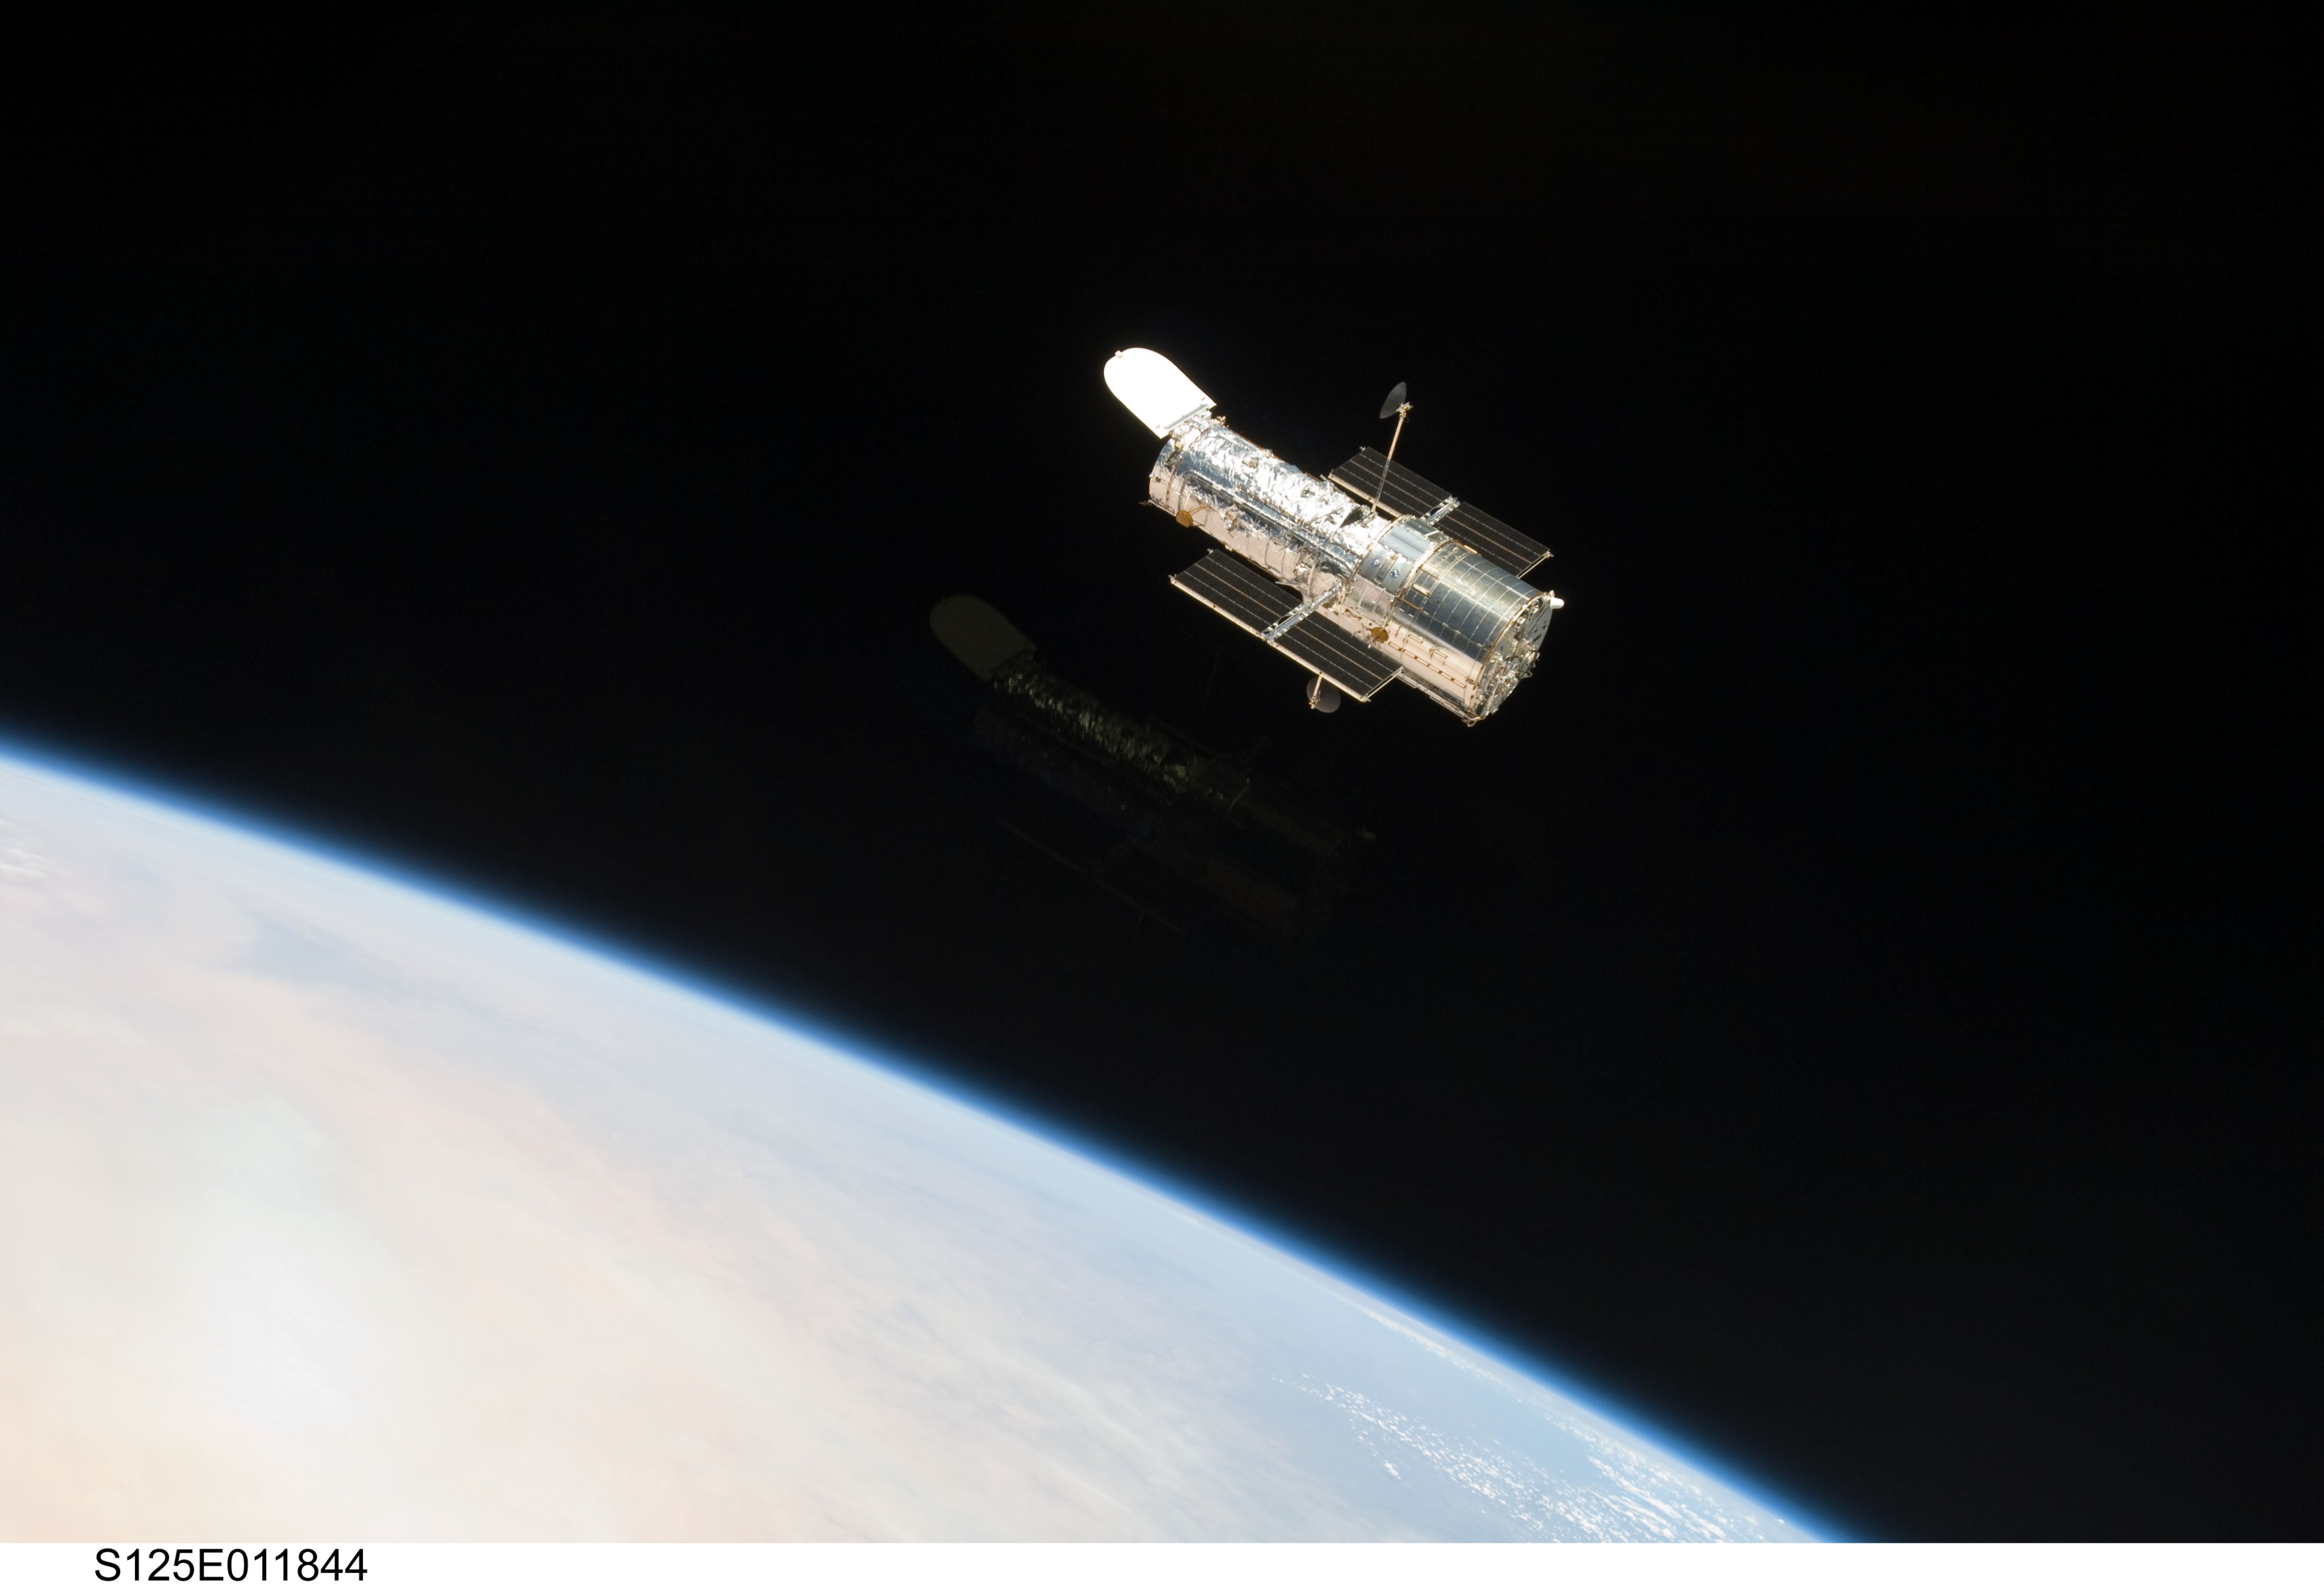 Hubble, at top center, against the black background of space. Earth limb is visible in the lower-left corner.